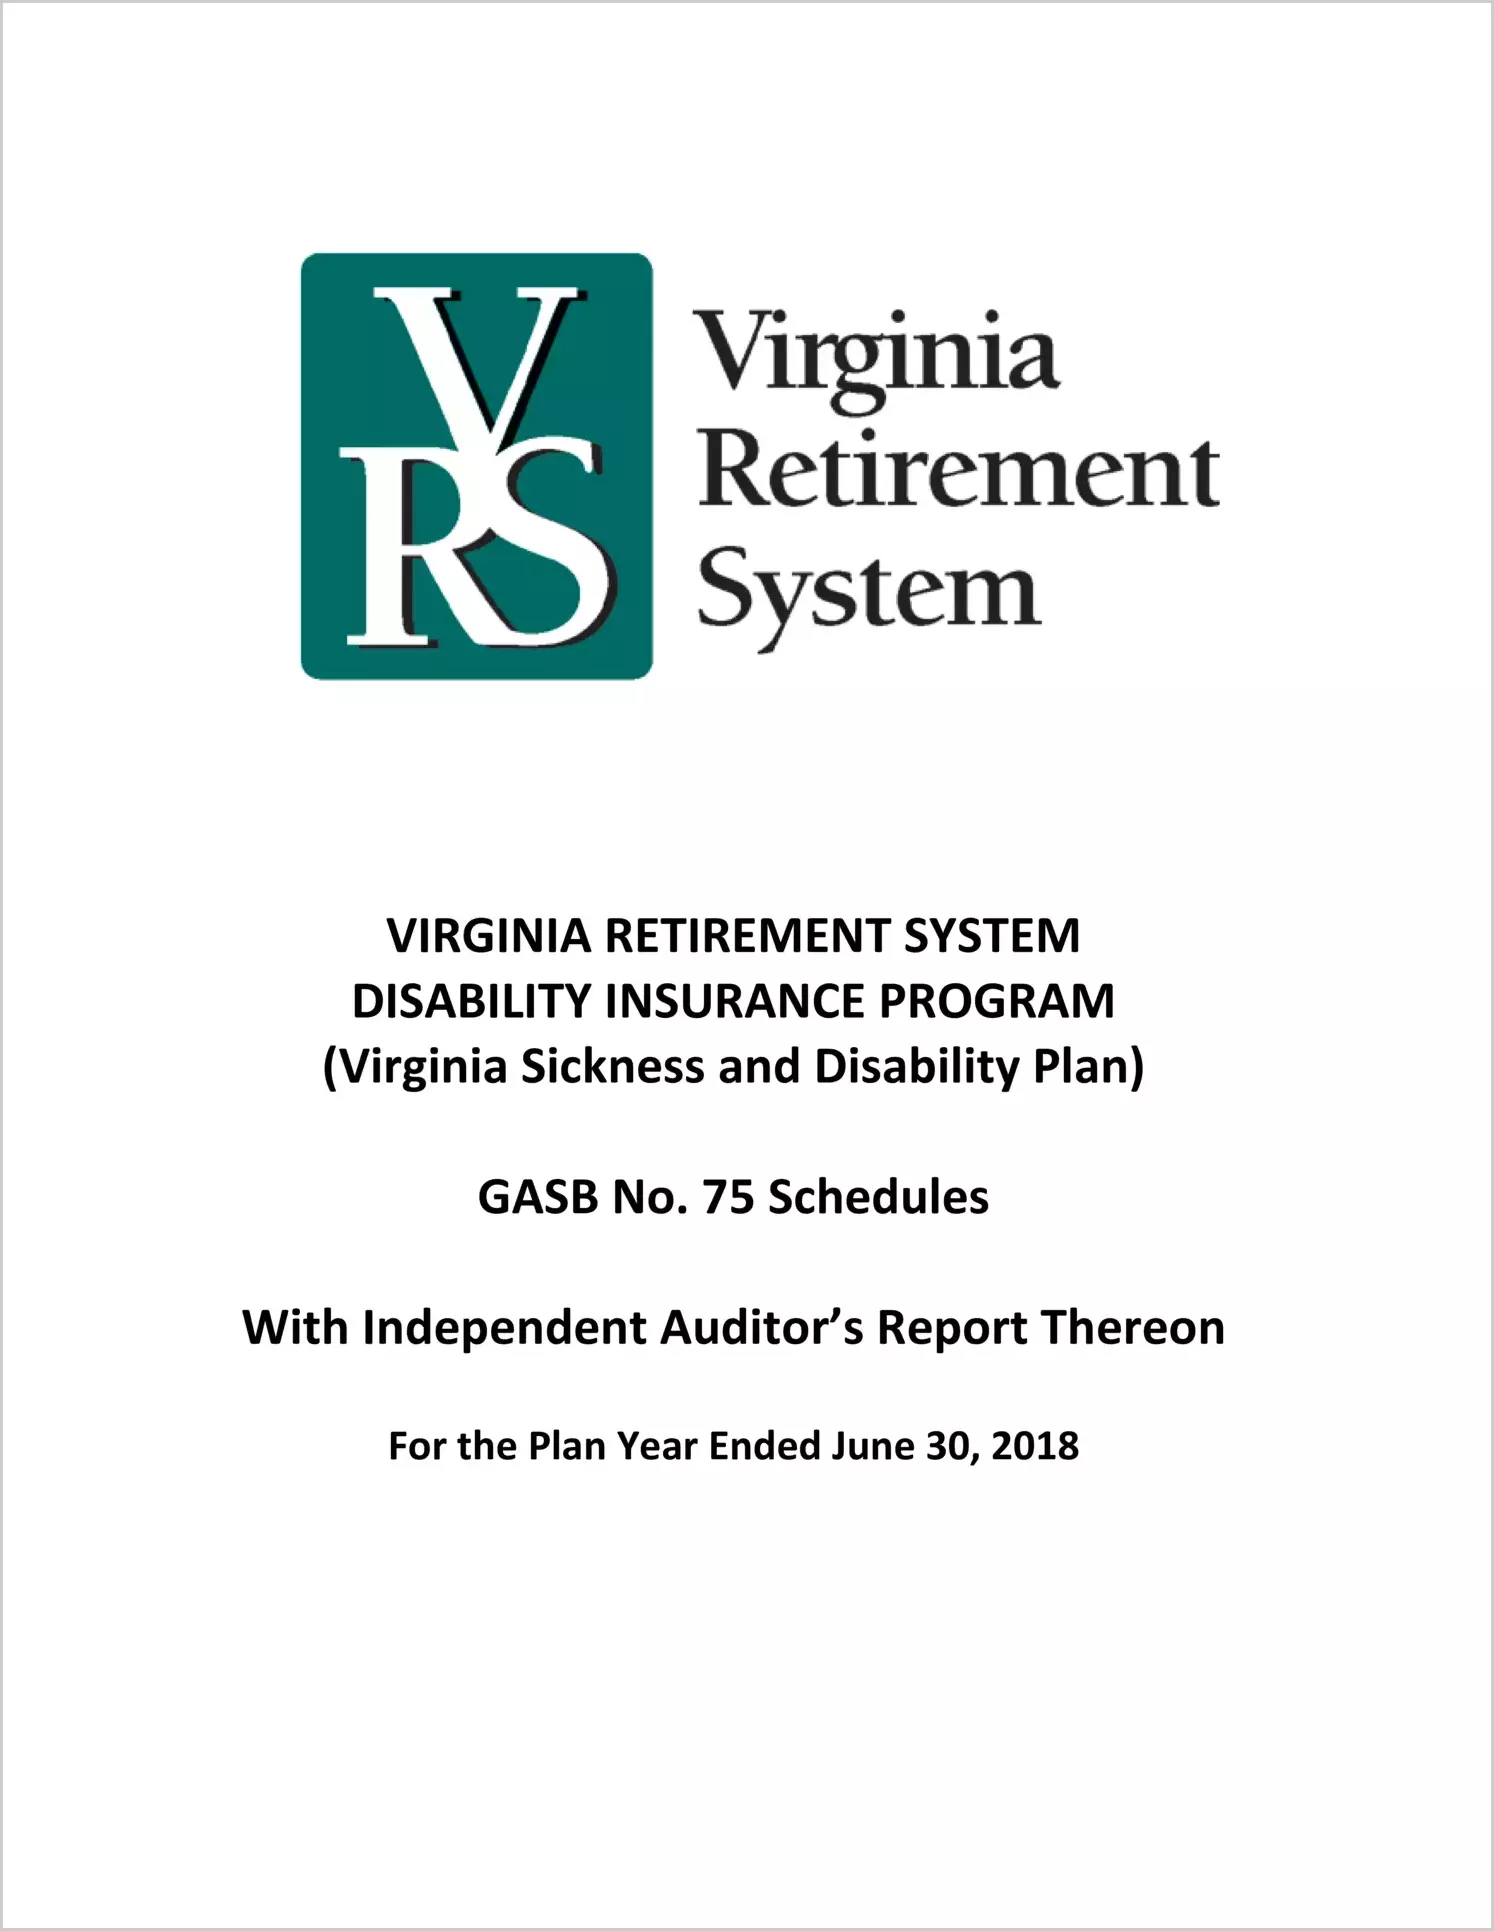 GASB 75 Schedule - Virginia Retirement System Disibility Insurance Program for the plan year ended June 30, 2018